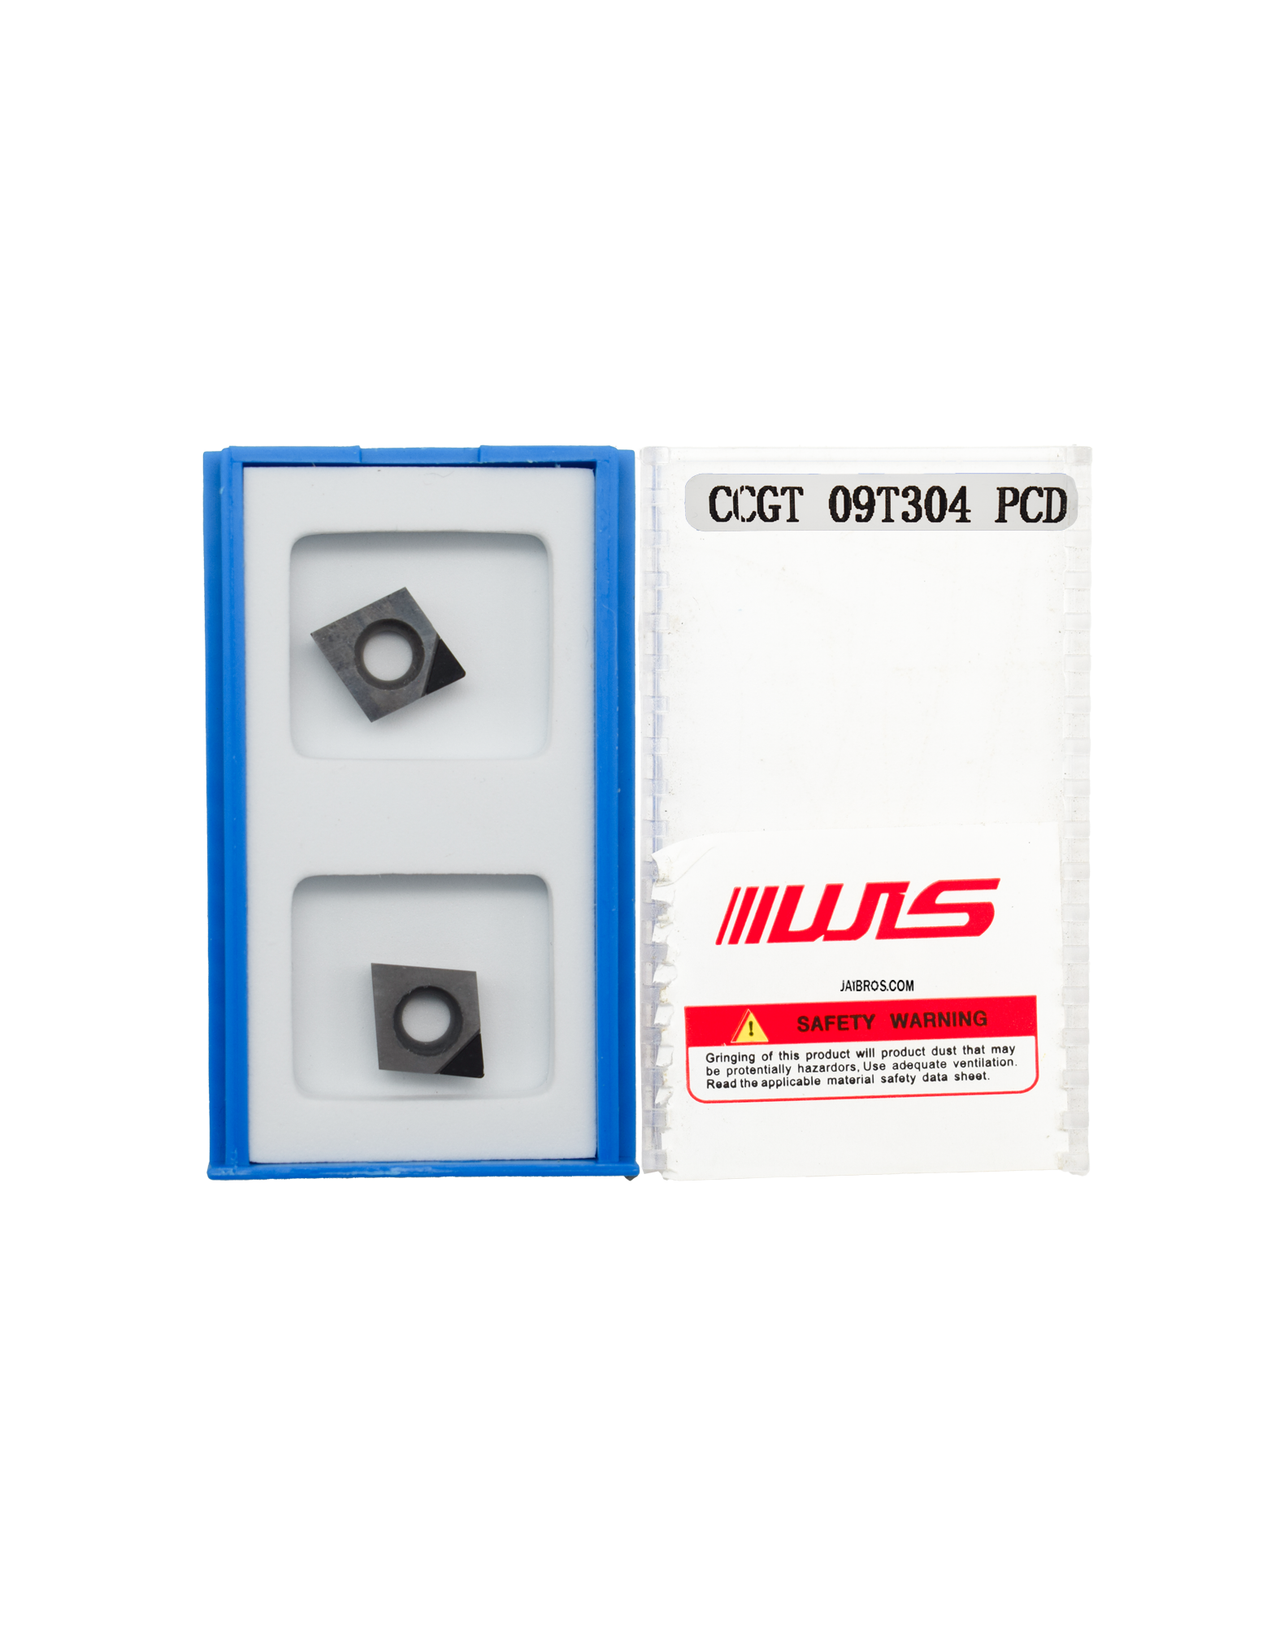 WS Pcd insert CCGW09T304/08 pack of 2